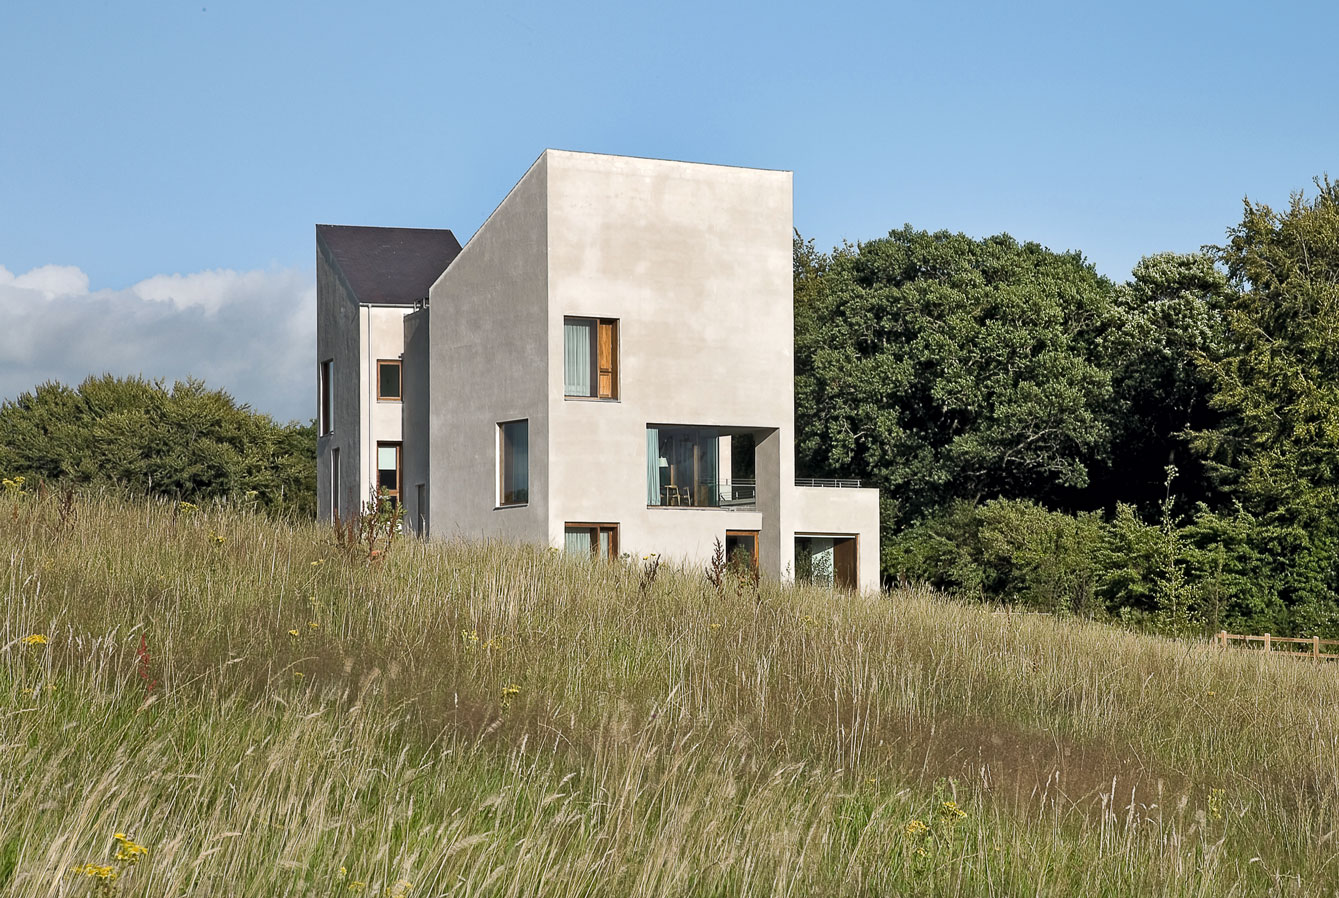 President’s House, University of Limerick, Limerick, Grafton Architects, 2006-11; northeast view. Photo by Alice Clancy 